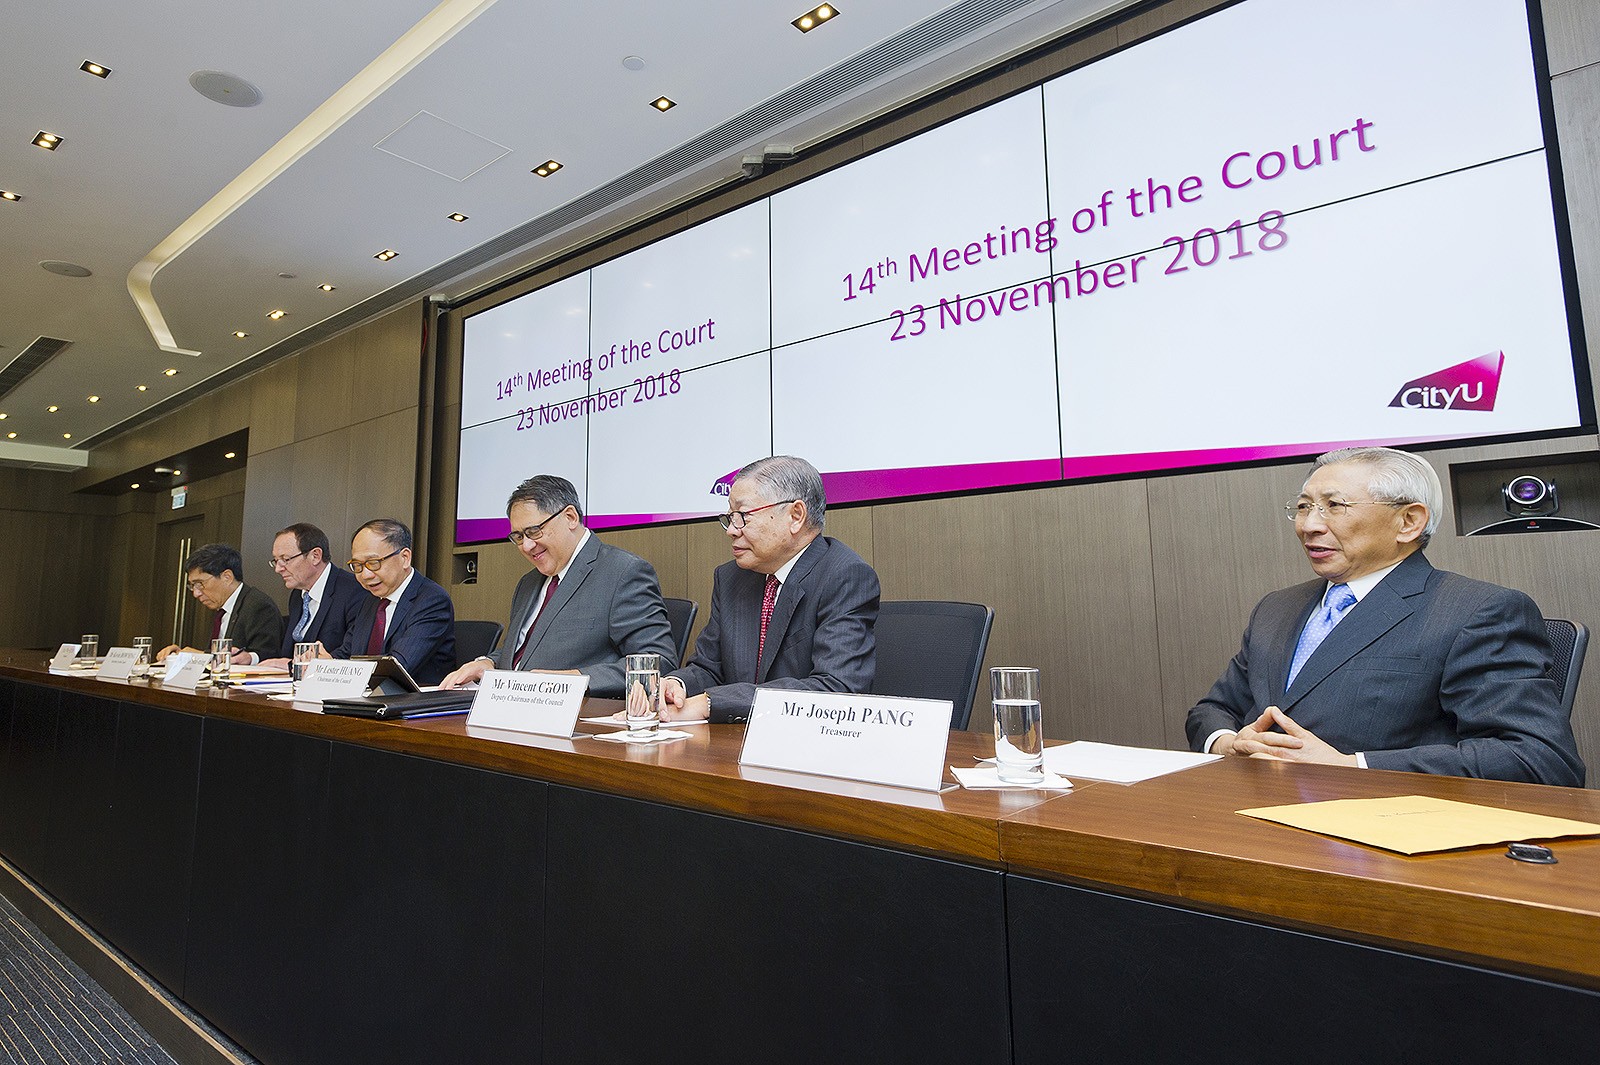 The Court learned about the latest developments at CityU.